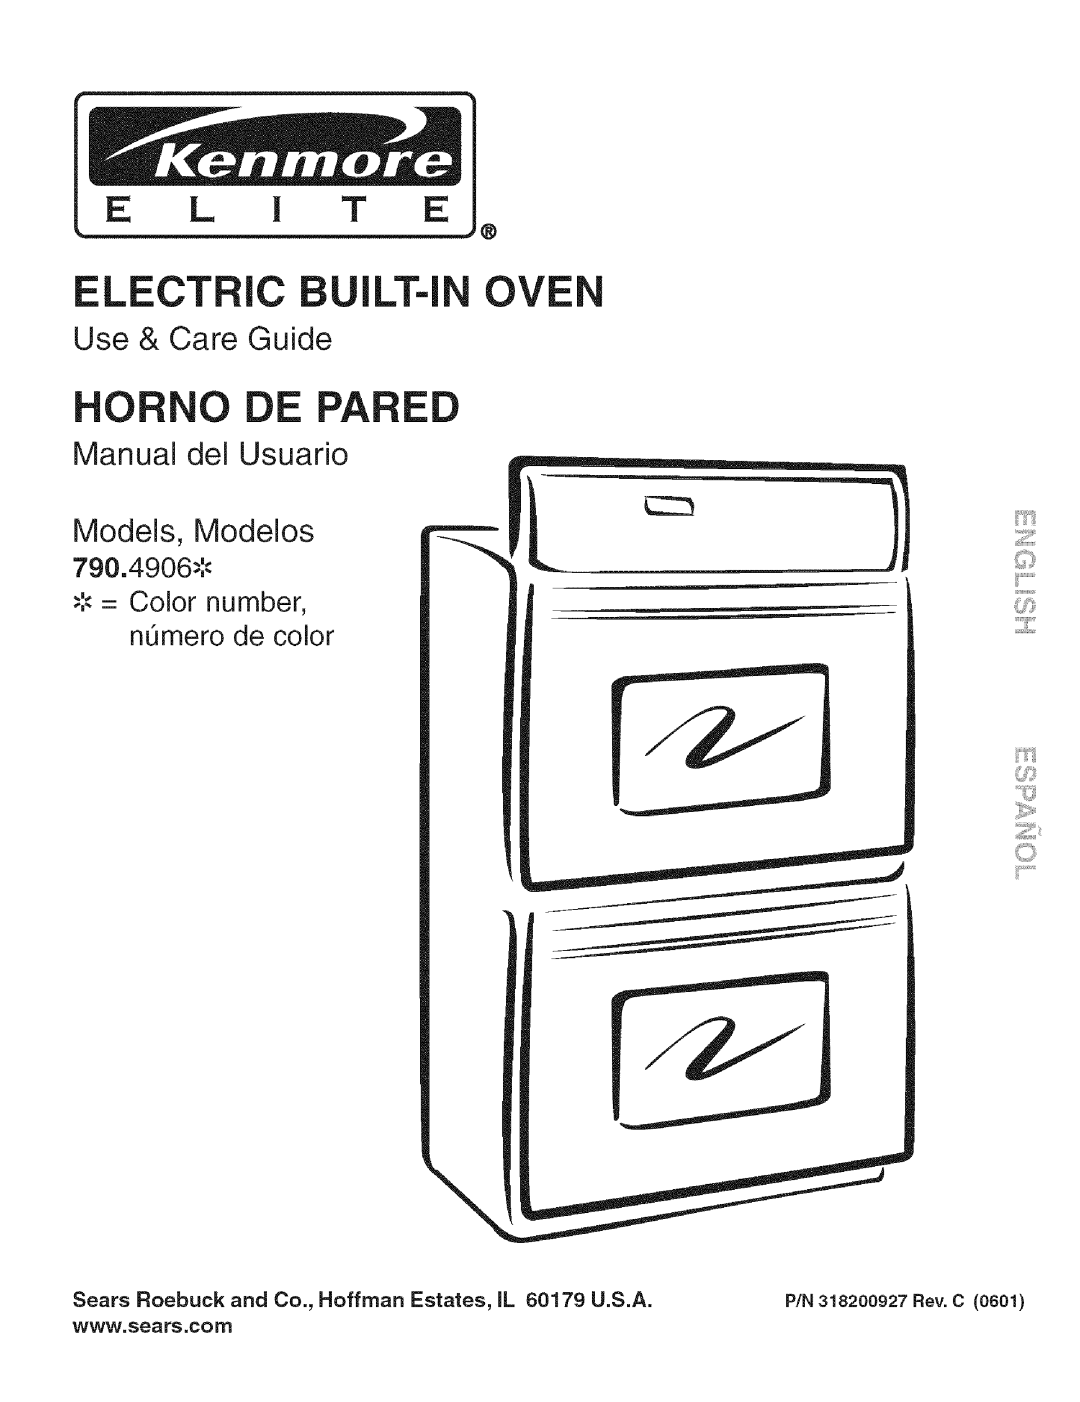 Kenmore manual Lectric Ilt-Ioven, 790.4906=_ = Color number, nQmero de color, Use & Care Guide 